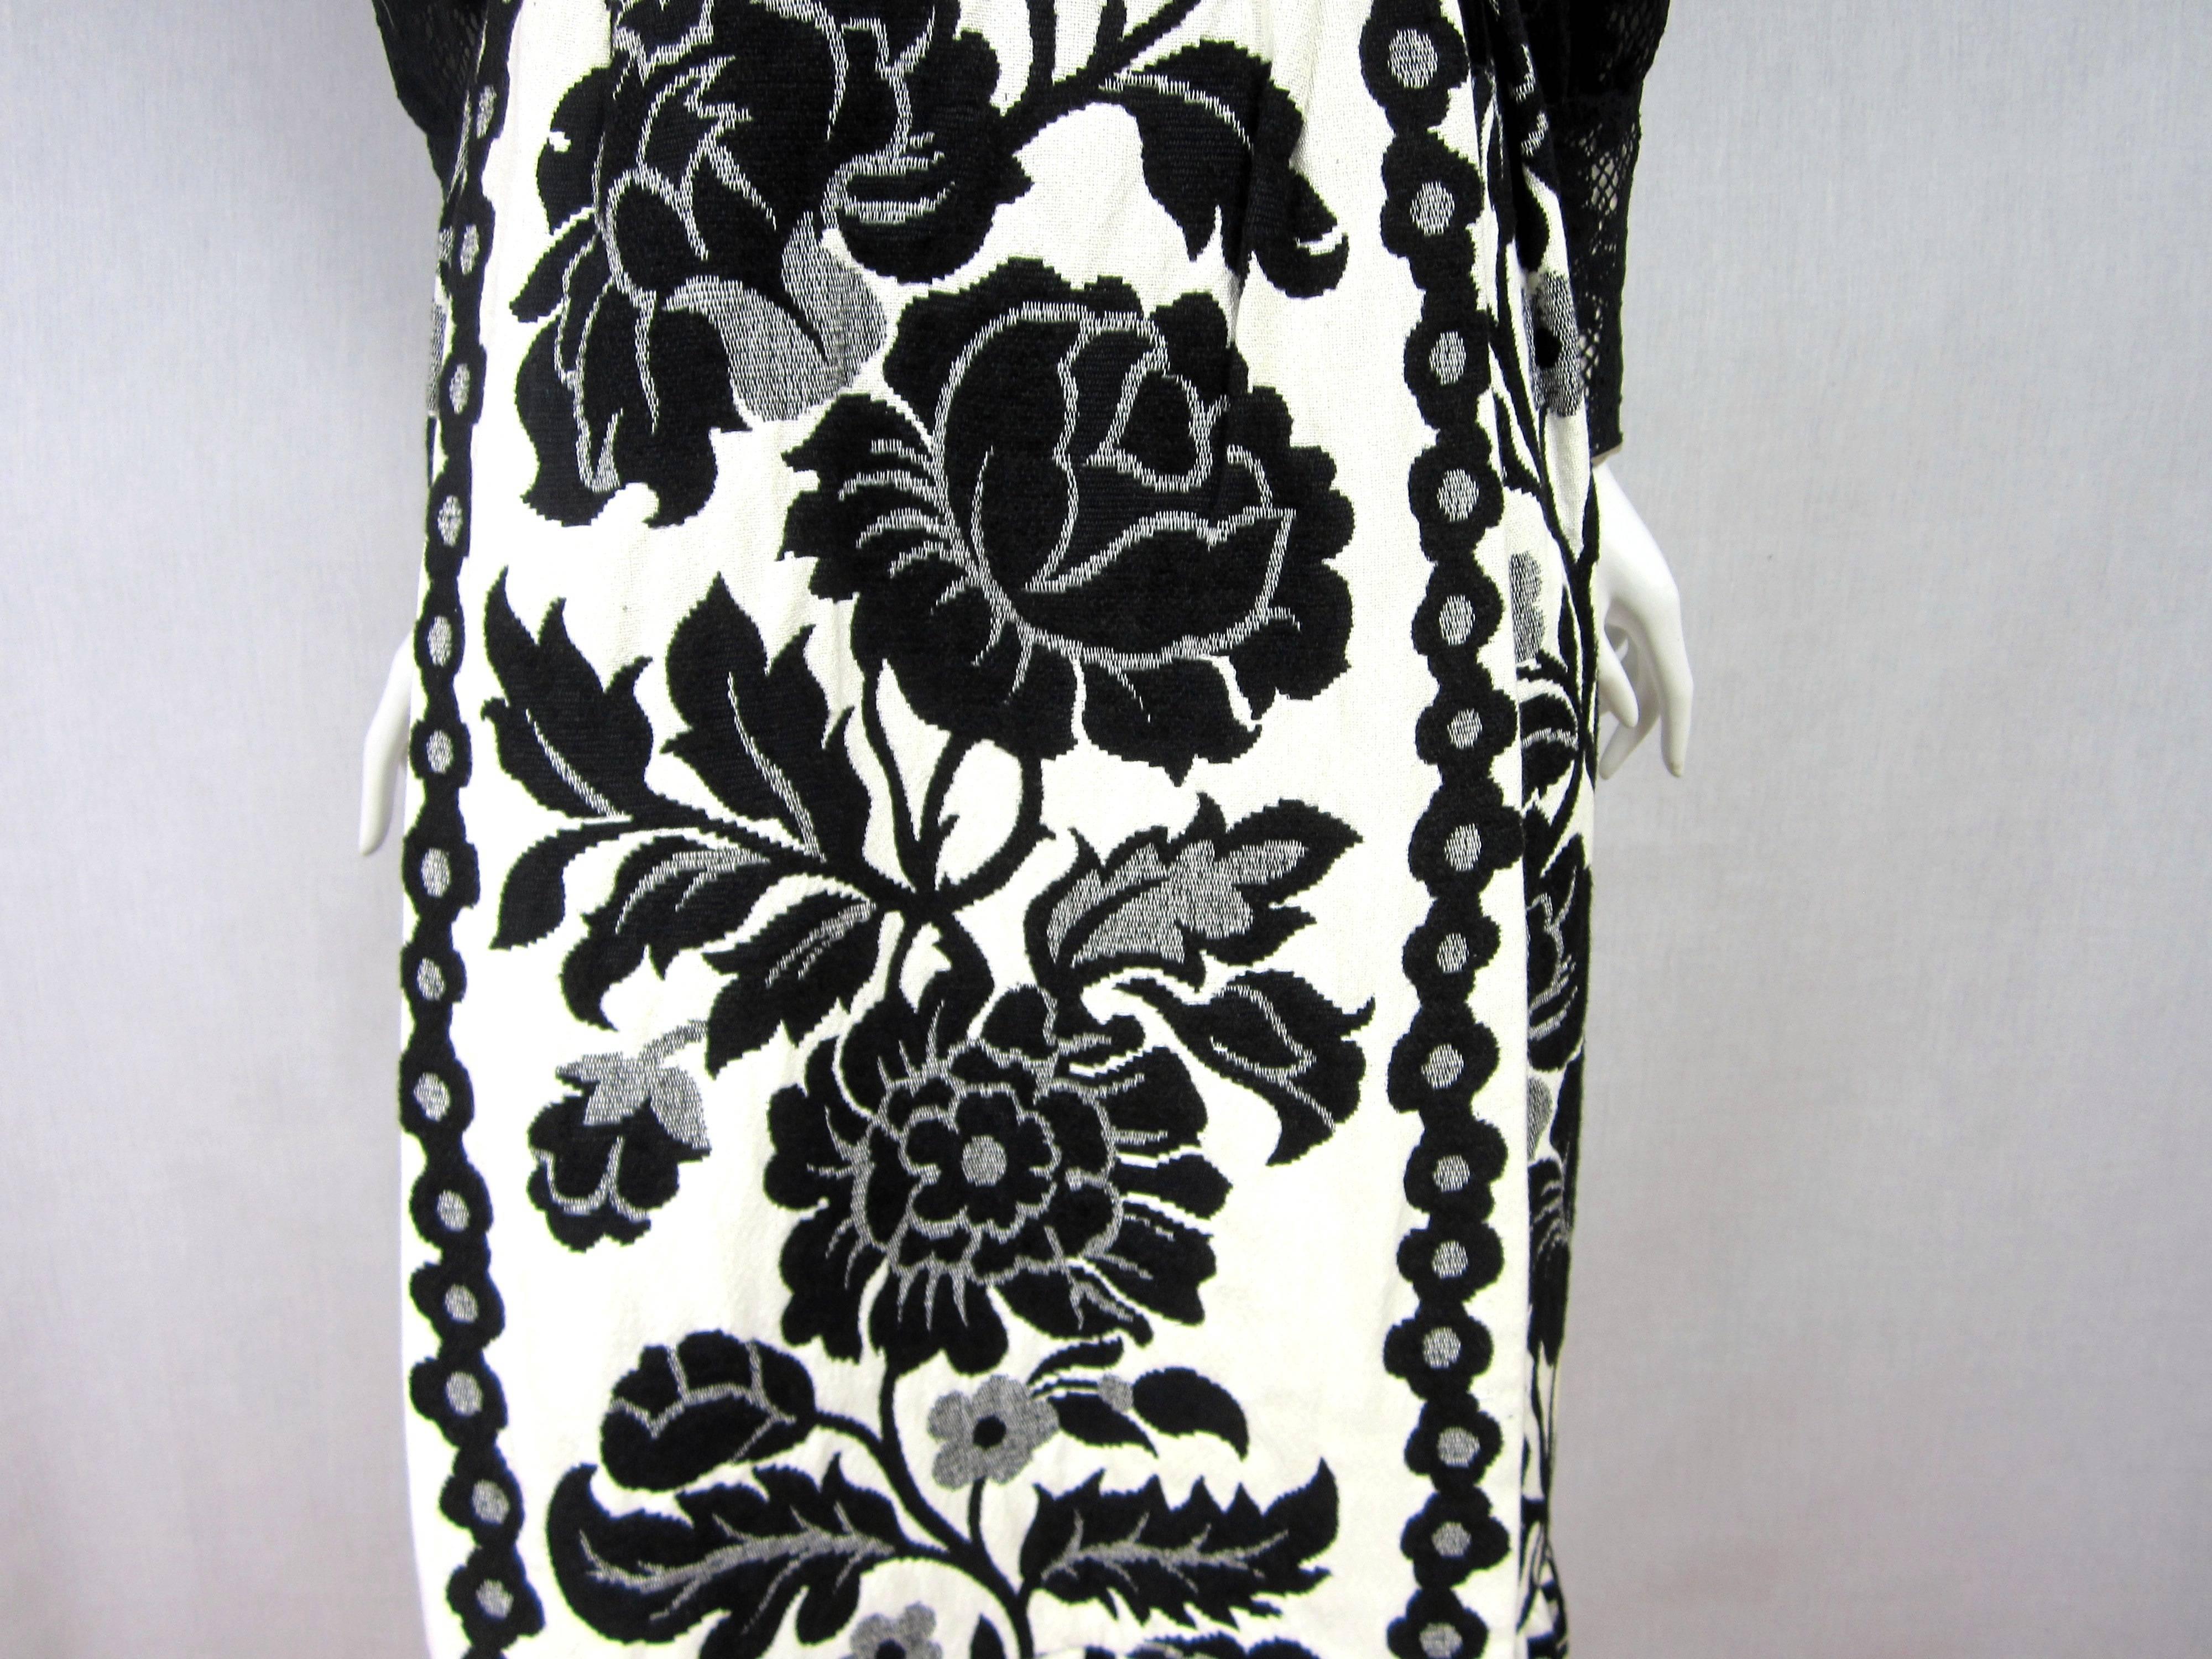 Hot Pants - Shorts & Wrap Maxi Skirt Mignon 1970s Black & White In Excellent Condition For Sale In Wallkill, NY